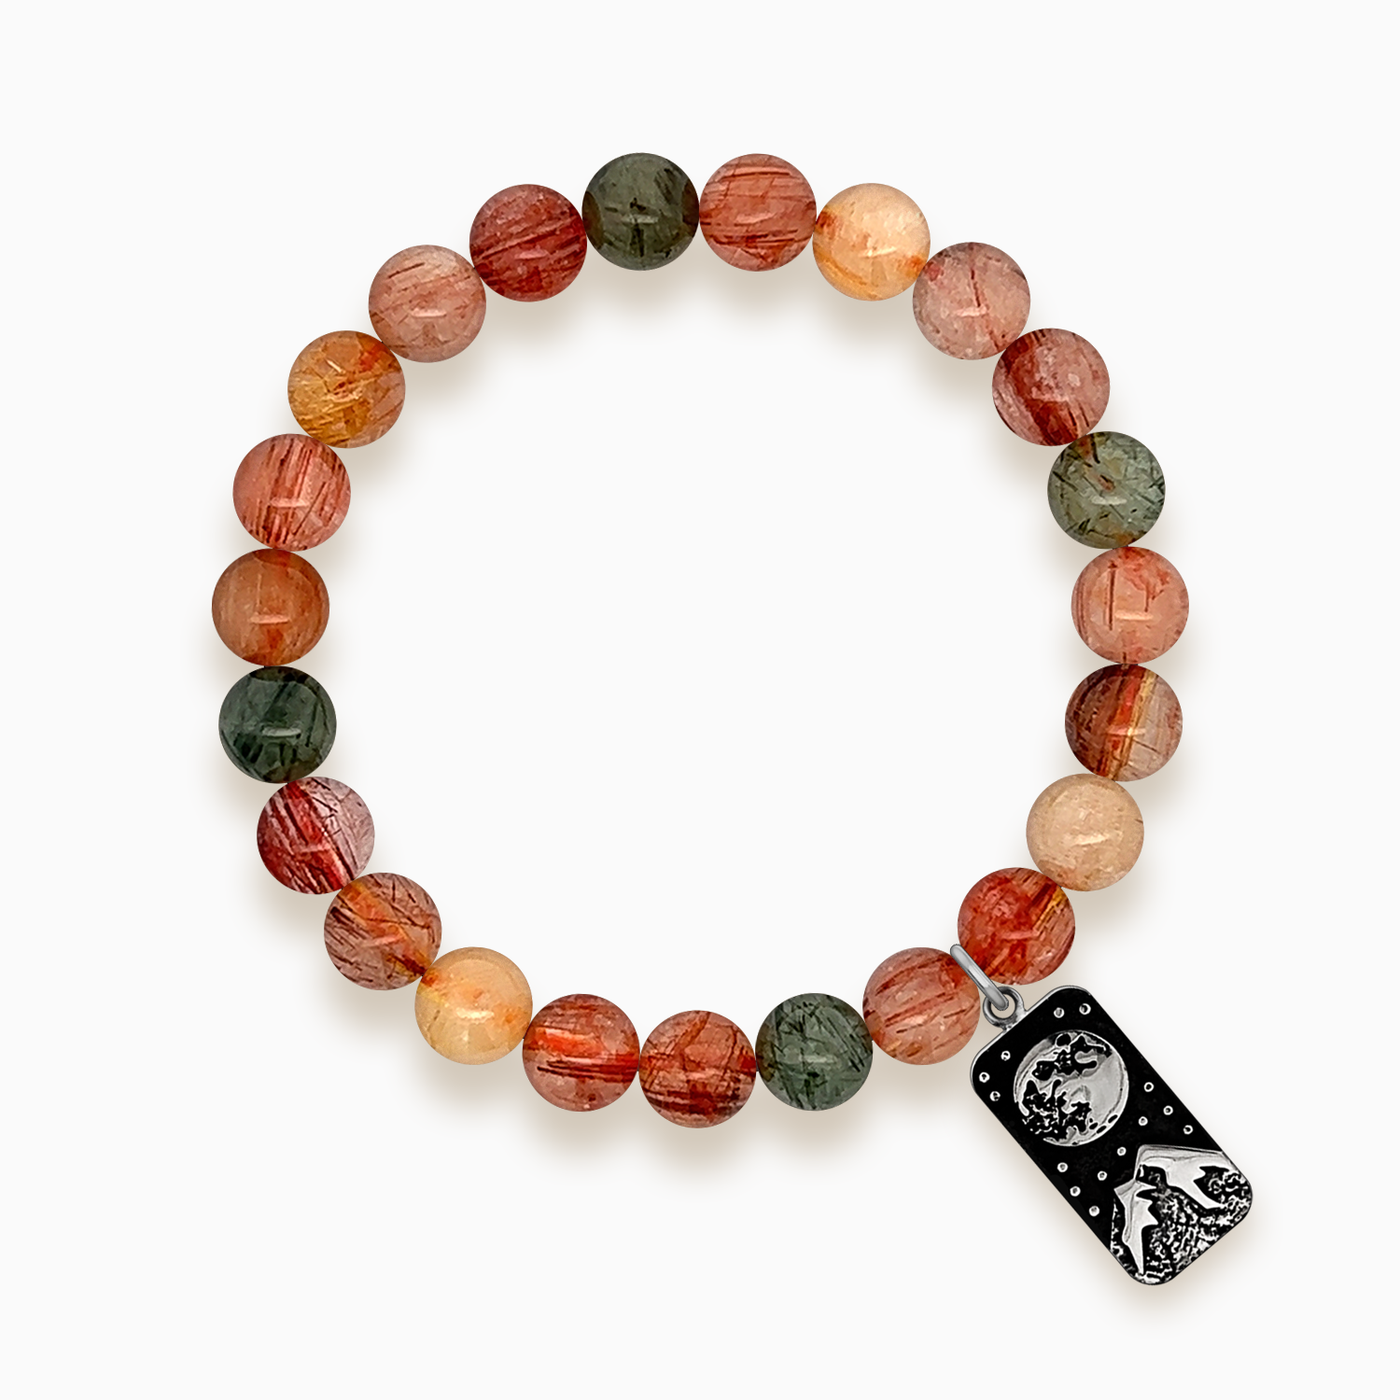 Gemstone Stacker Bracelet with Moon and Mountain Charm